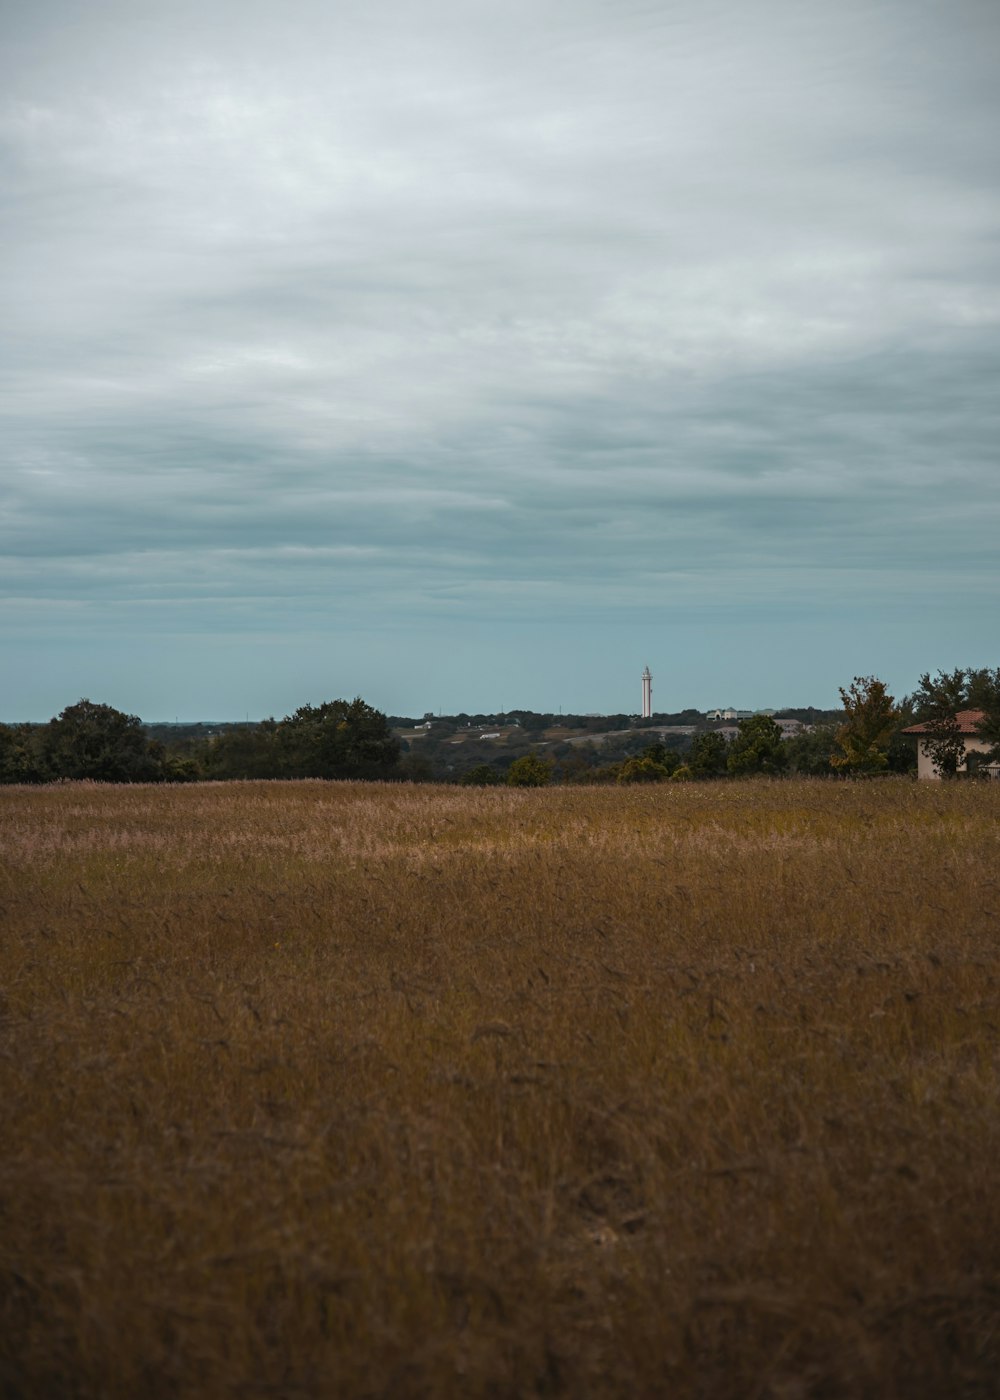 a large field with a house in the distance